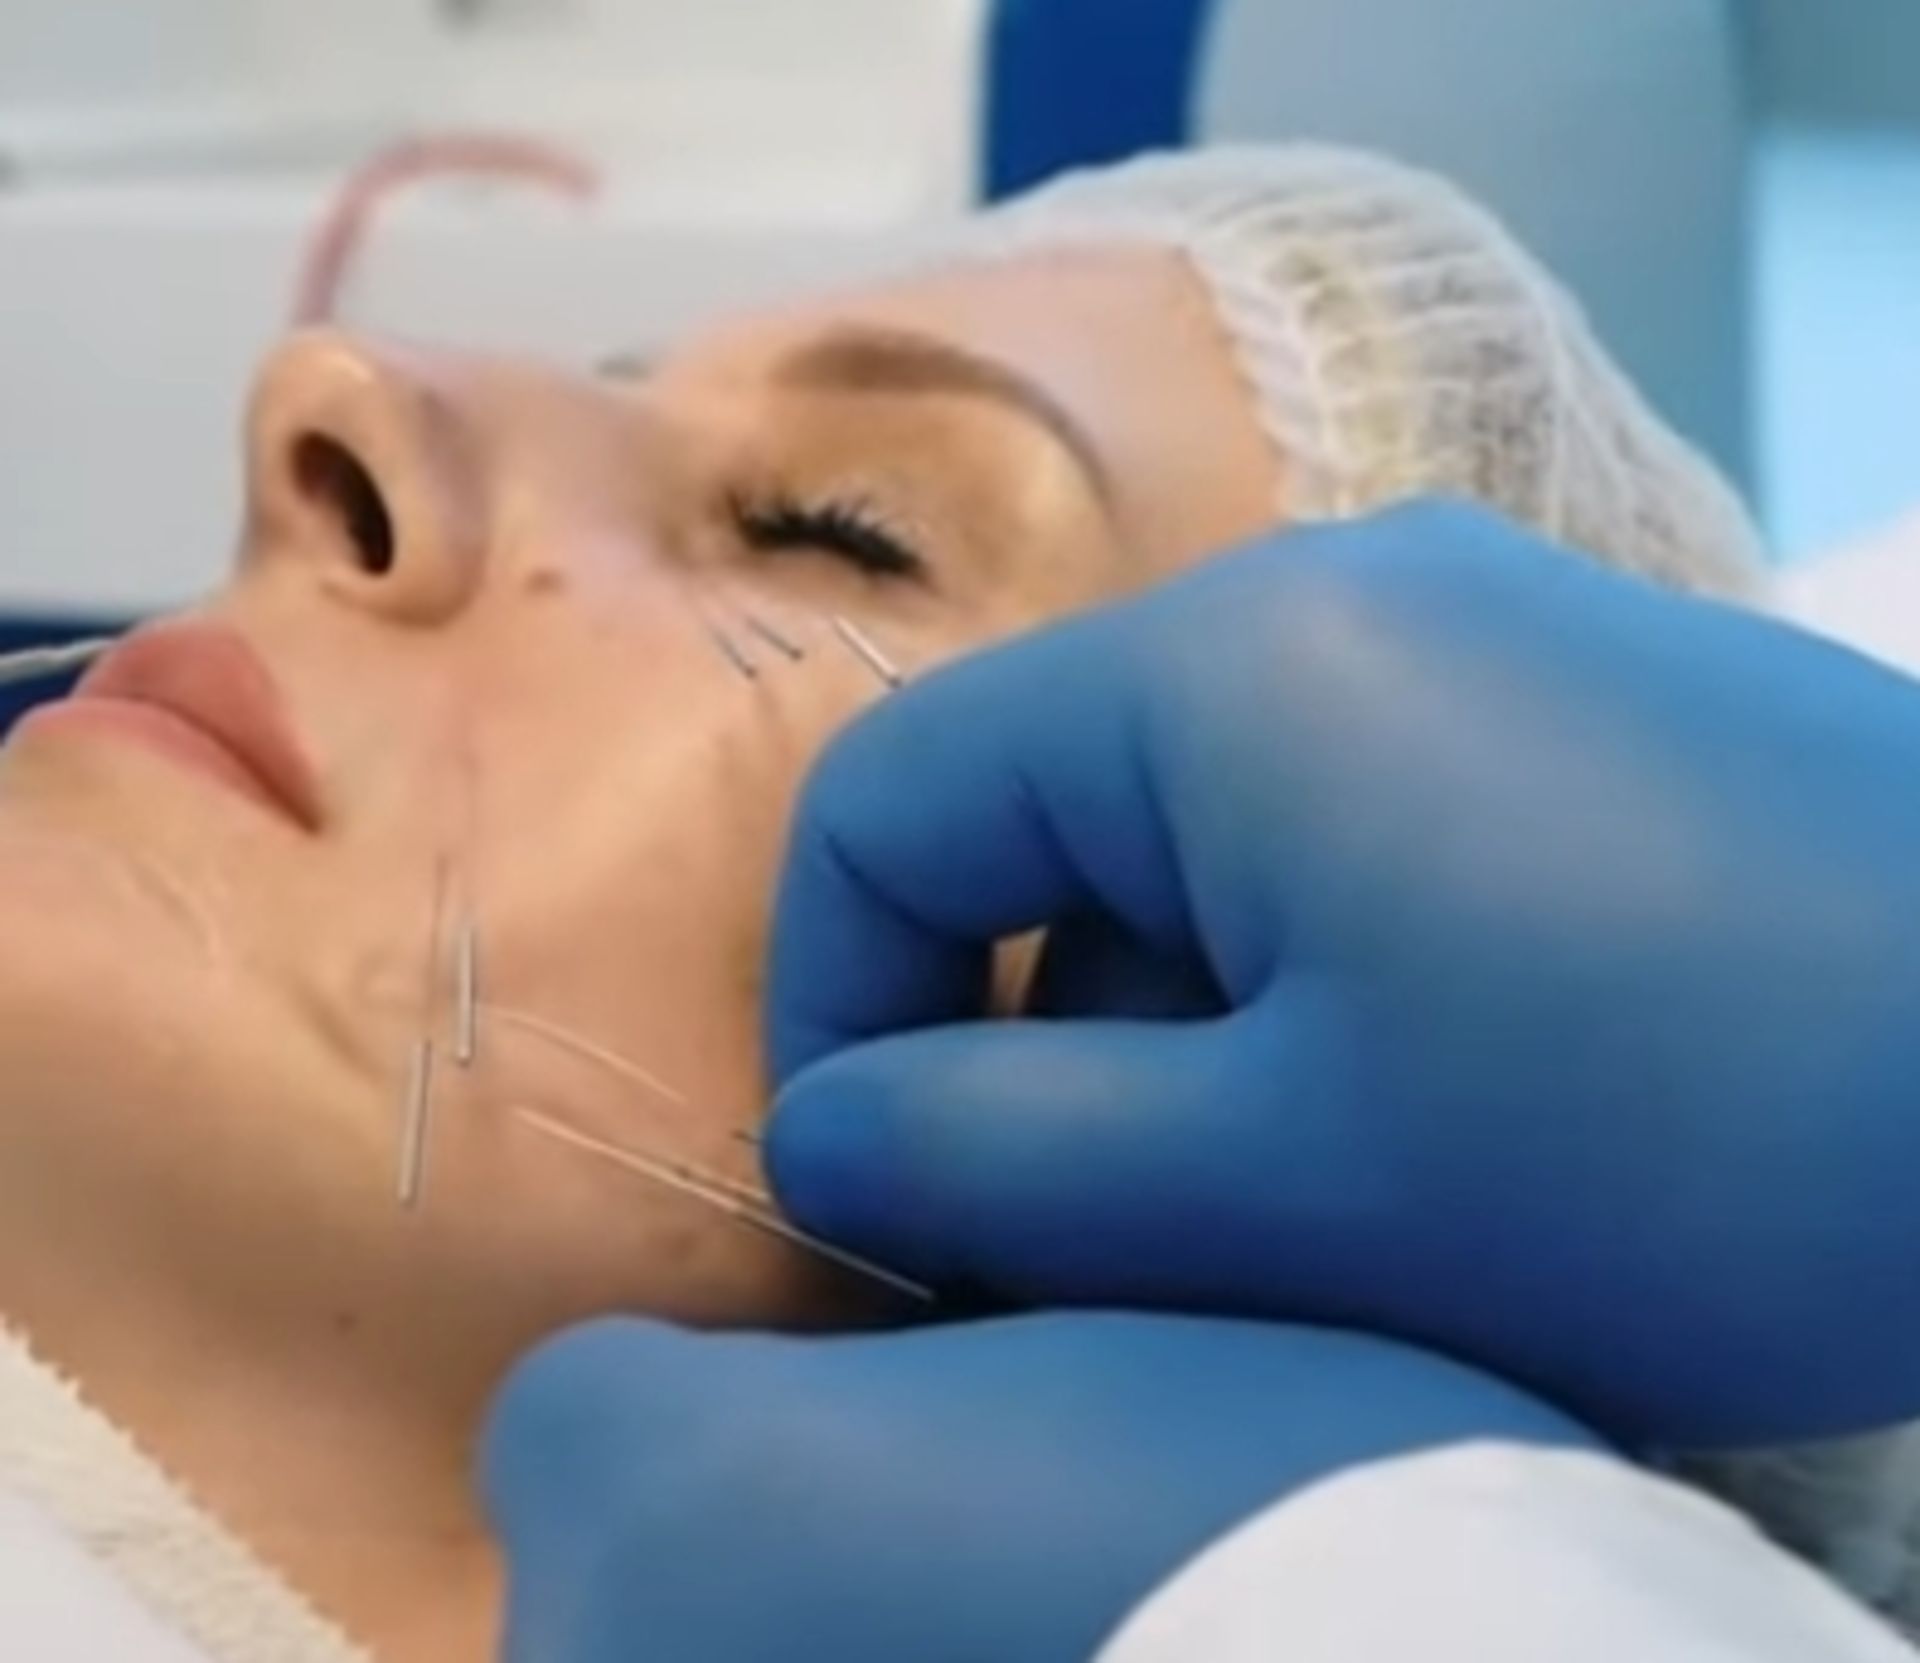 1 x GMV Needle Shaping System For None Surgical Facial and Body Reconstruction - Image 8 of 9